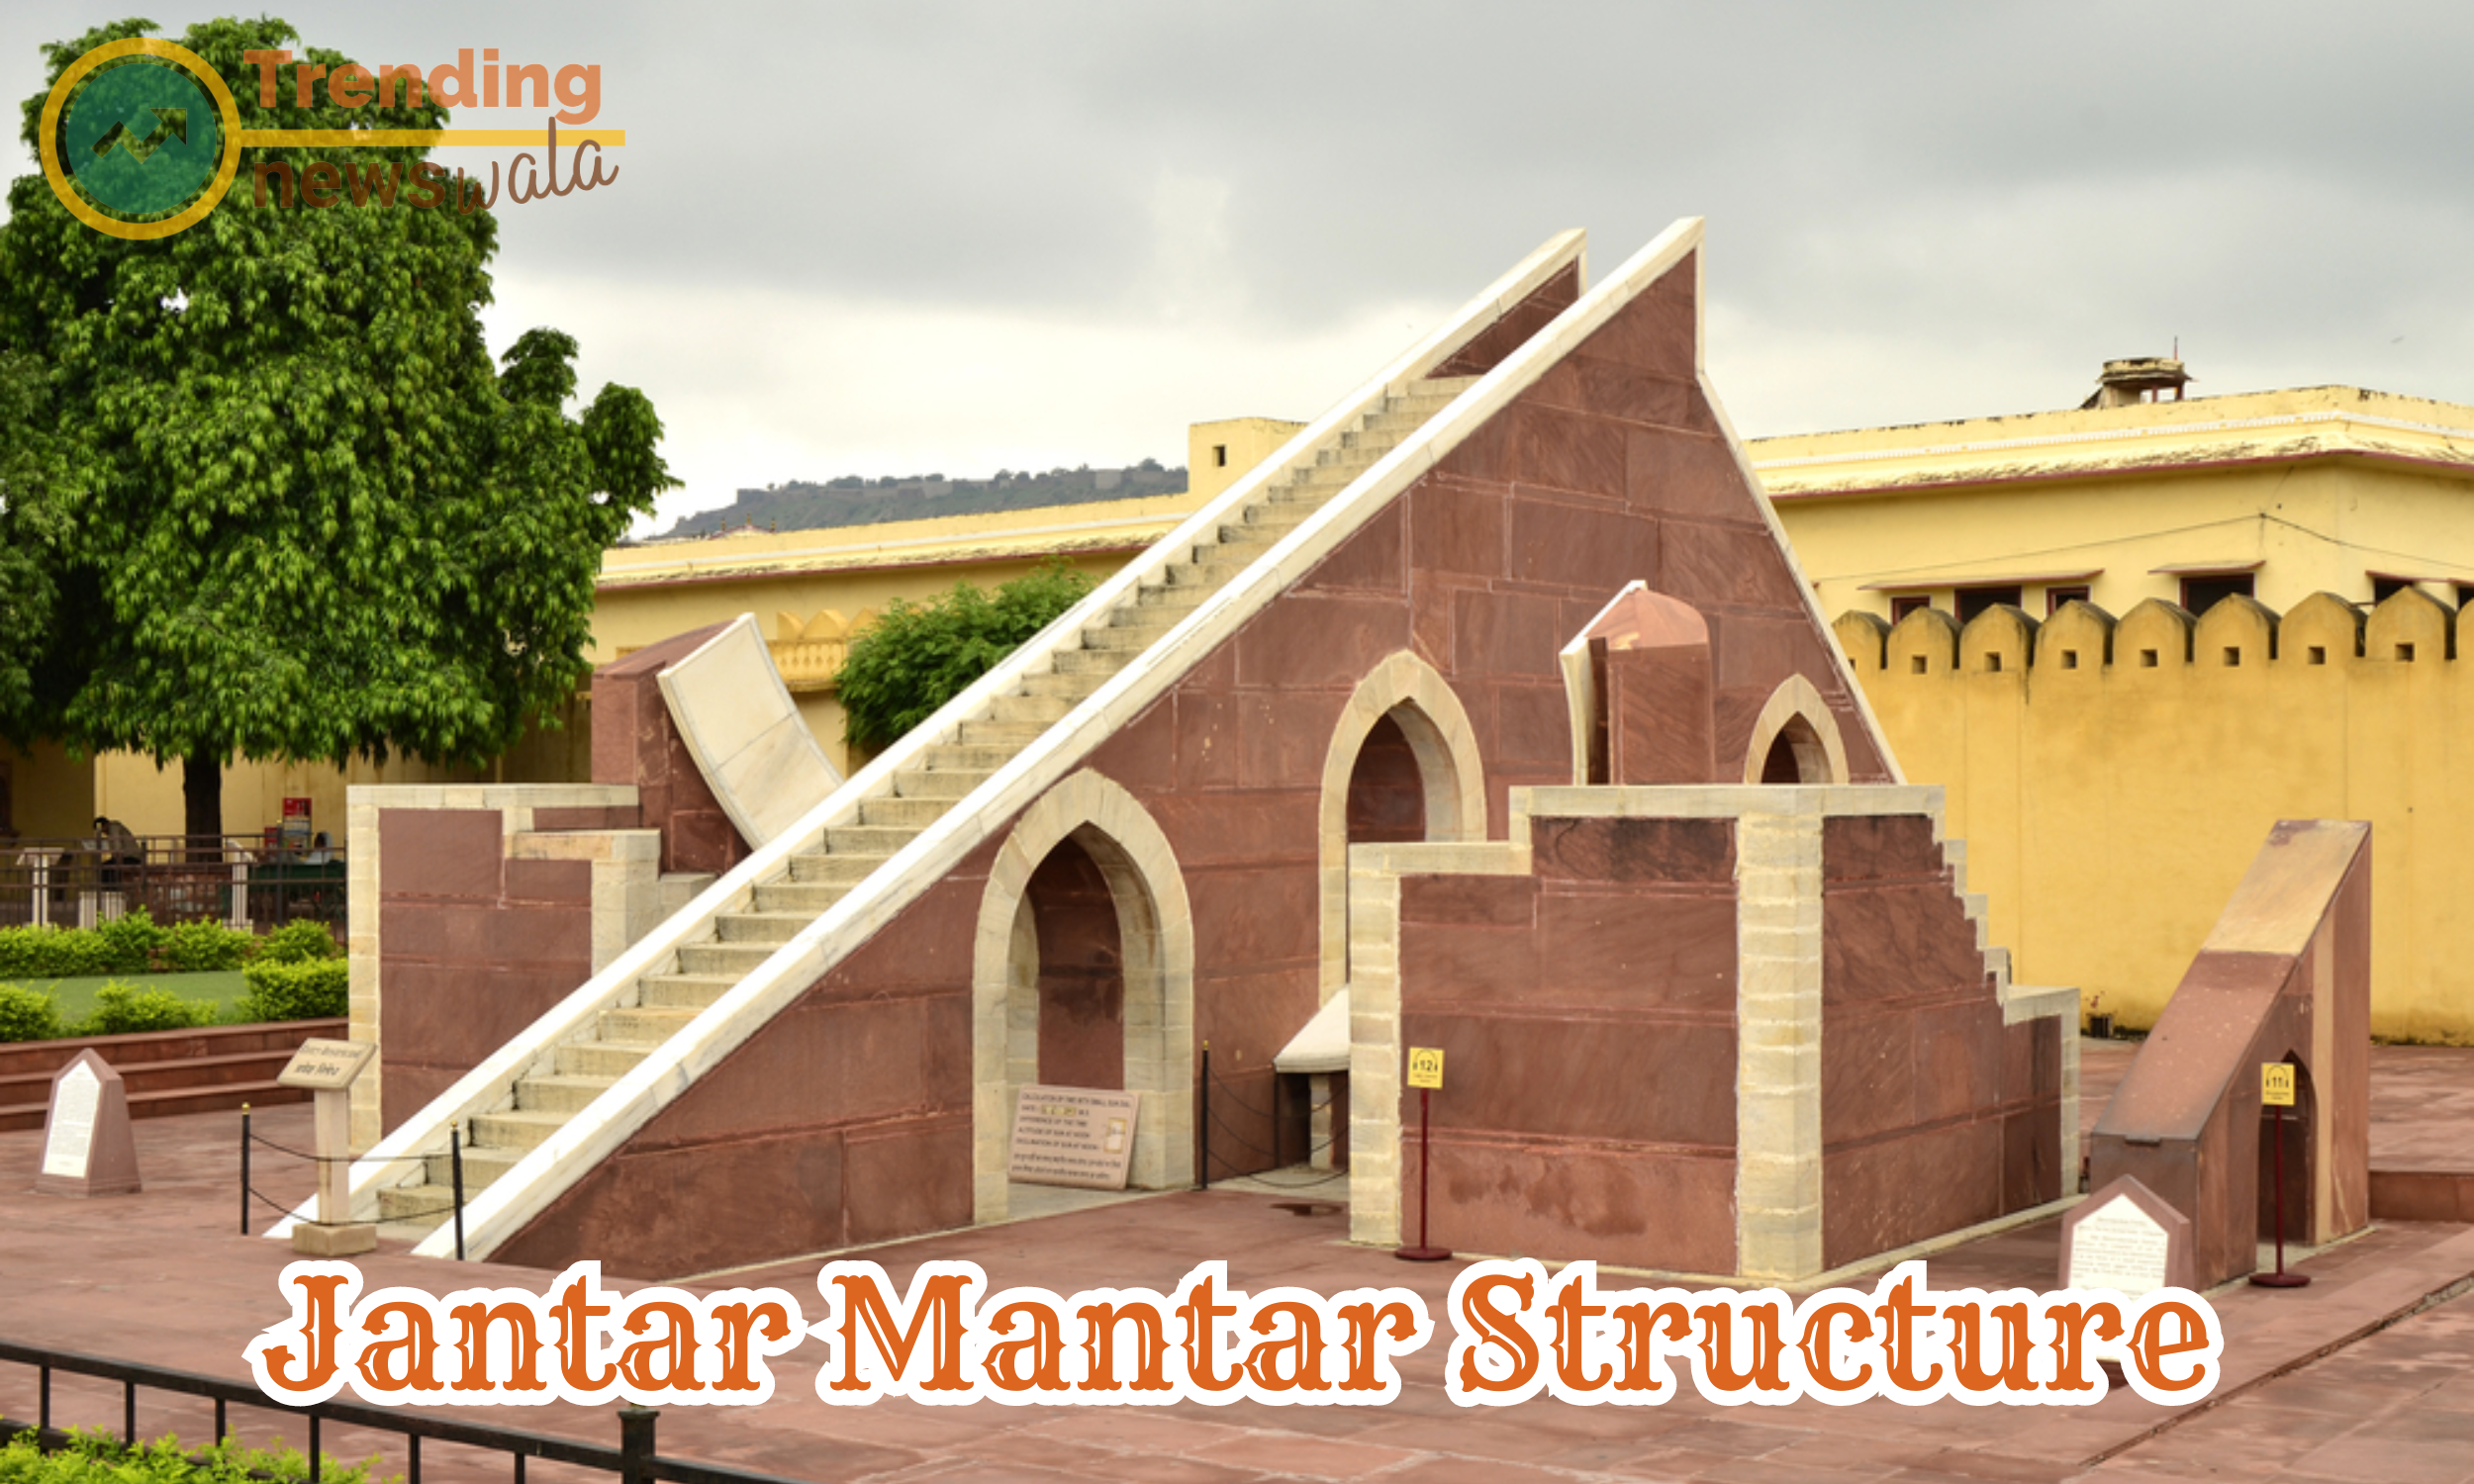 The Jantar Mantar in Jaipur is a fascinating astronomical observatory